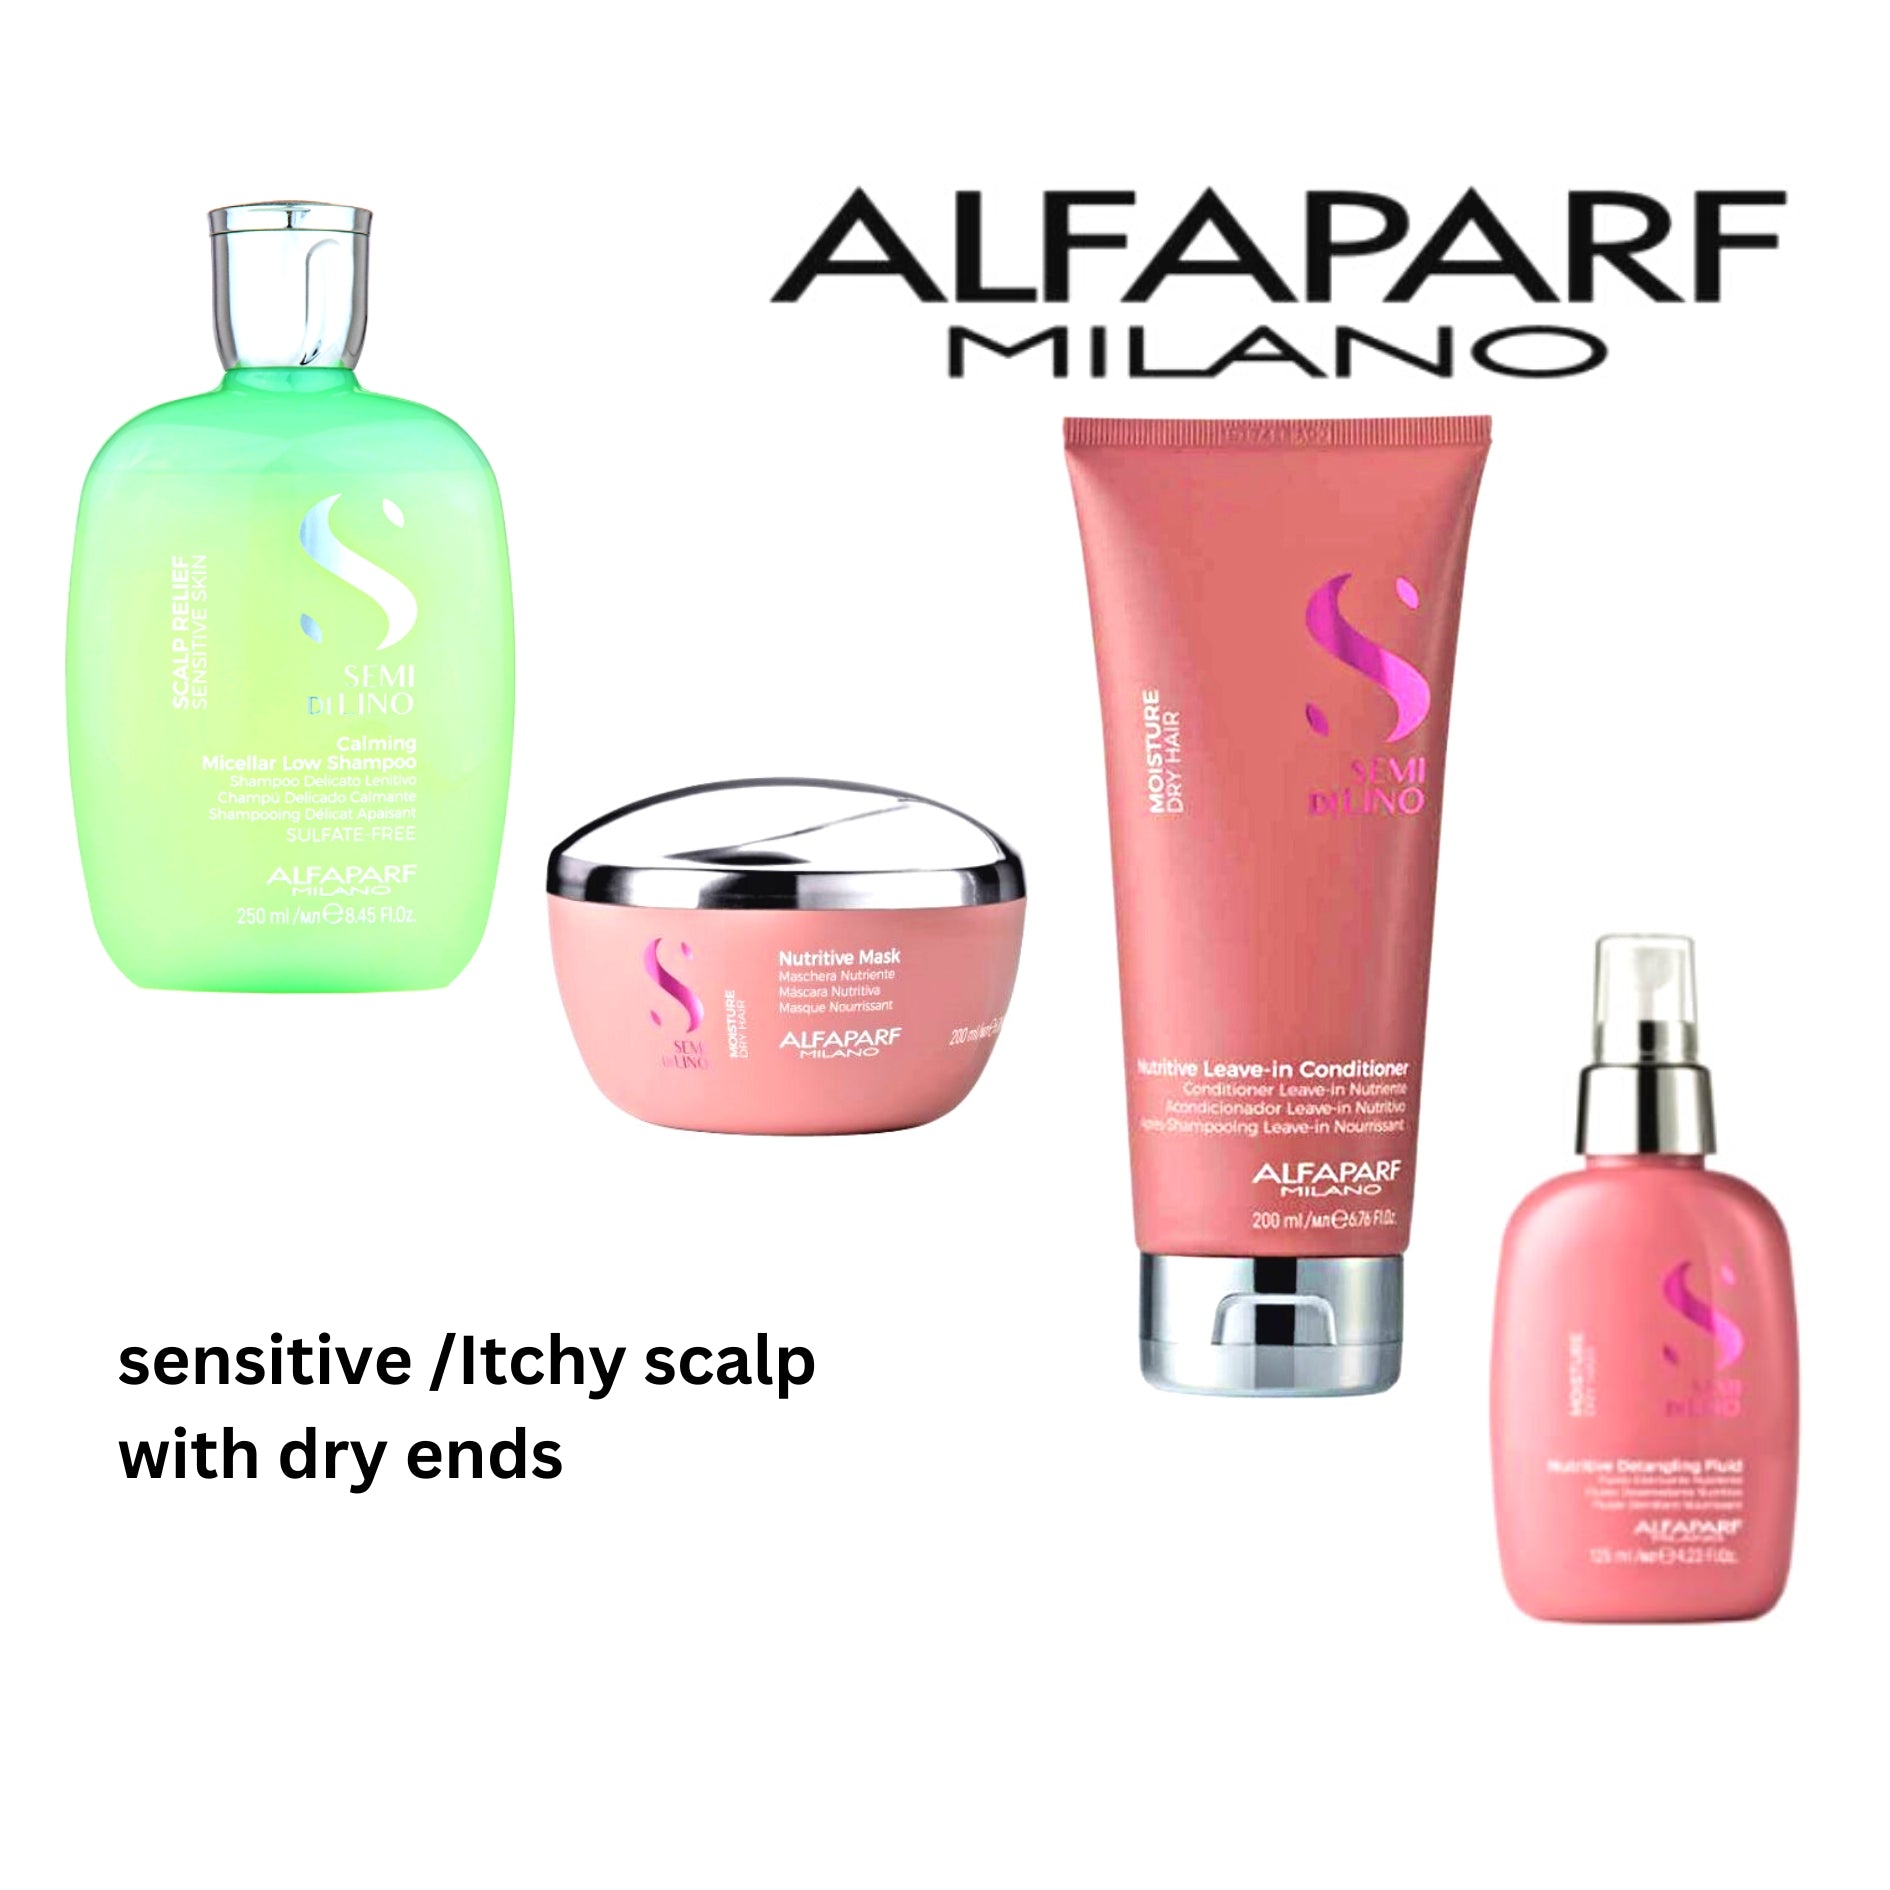 ALFAPARF Sensitive Scalp Shampoo + Mask, Leave in conditioner and Detangler Spray at mylook.ie